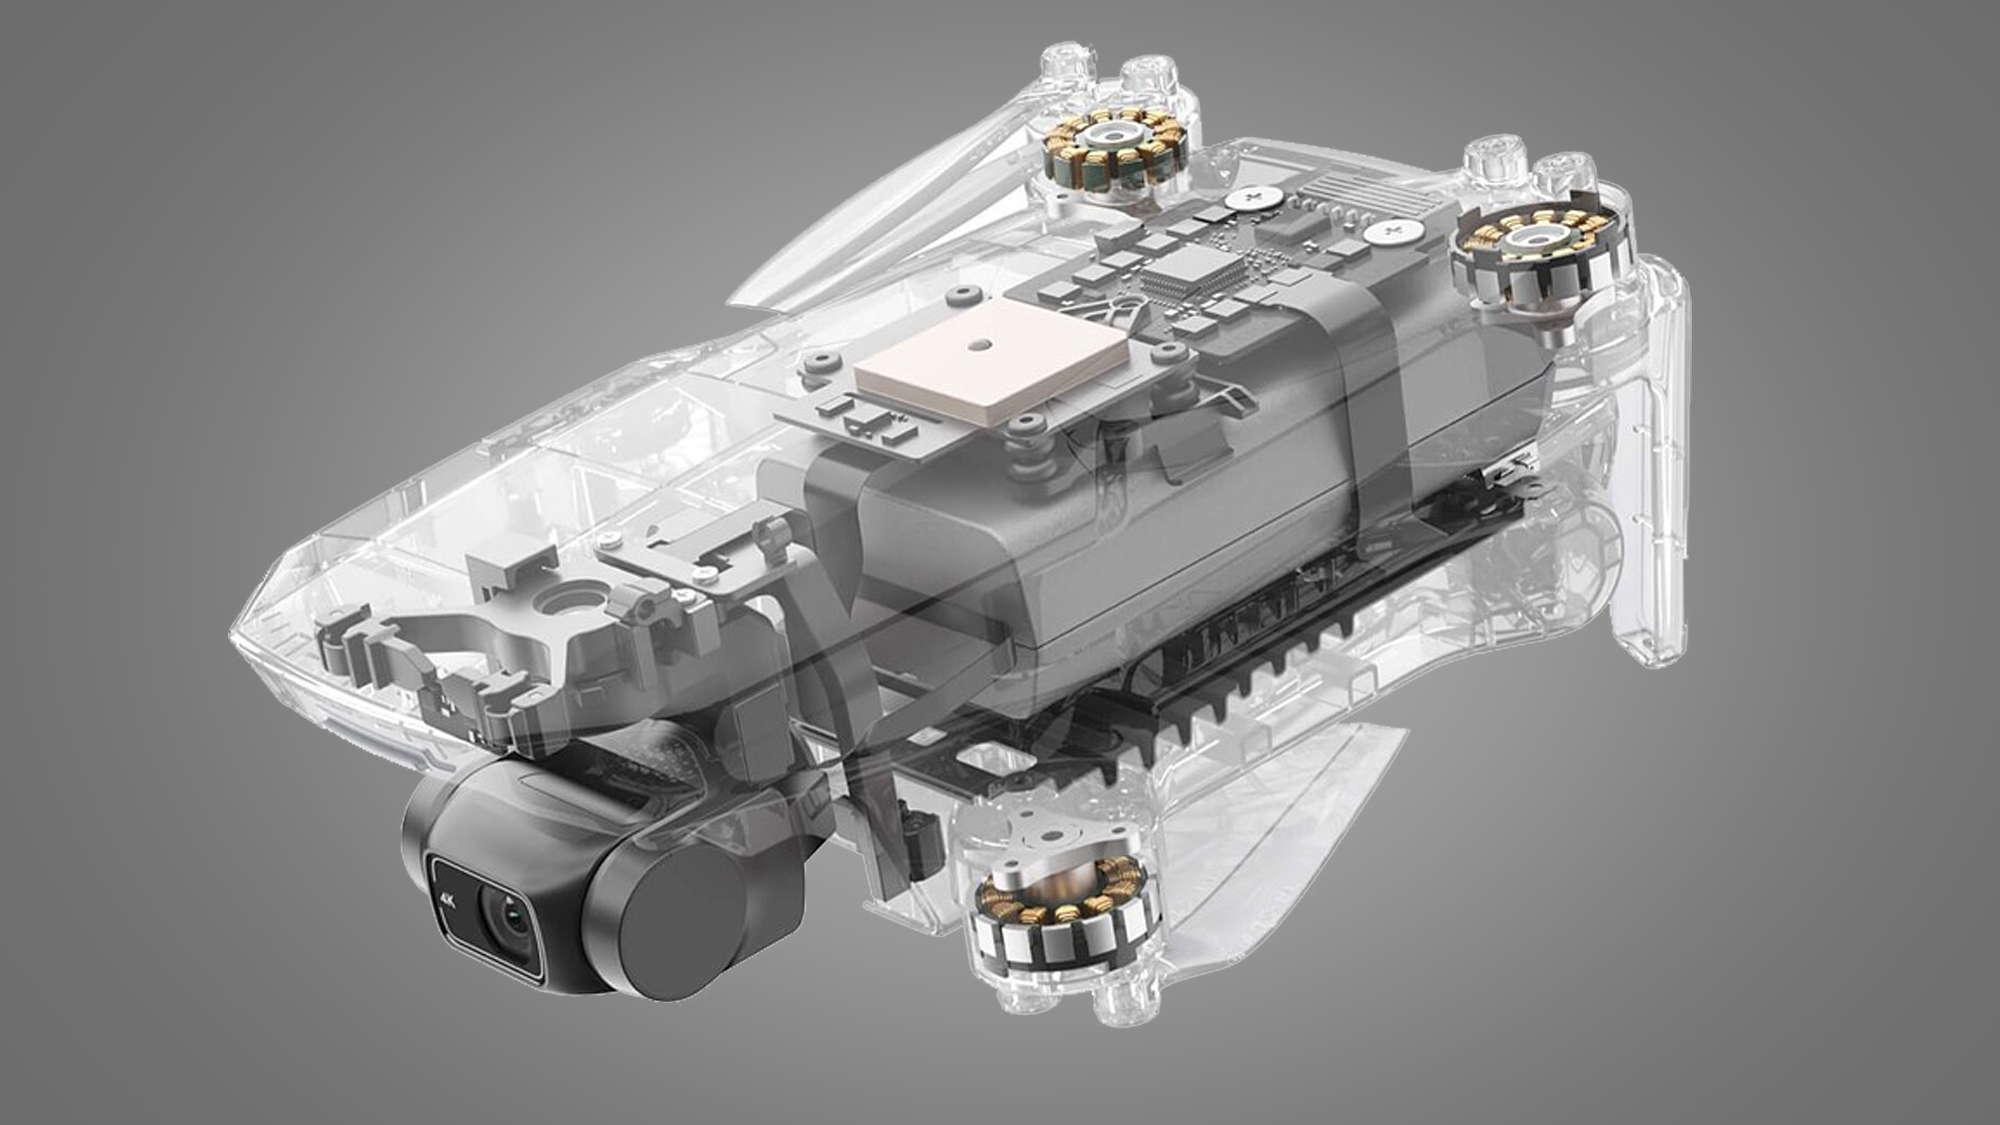 A cutaway image of the DJI Mini 2 drone showing its internal components